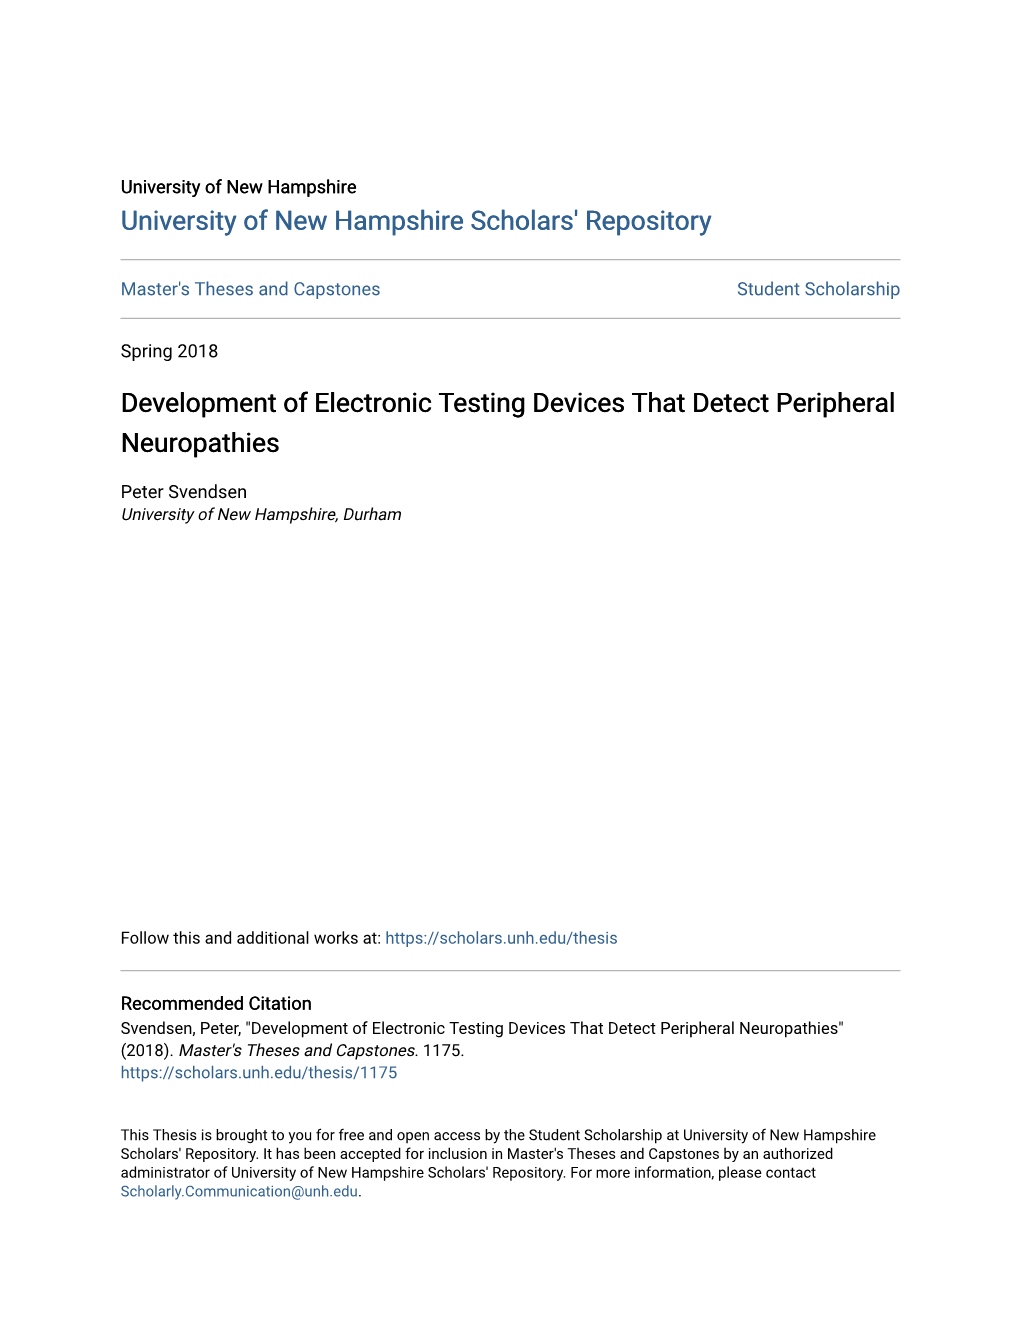 Development of Electronic Testing Devices That Detect Peripheral Neuropathies